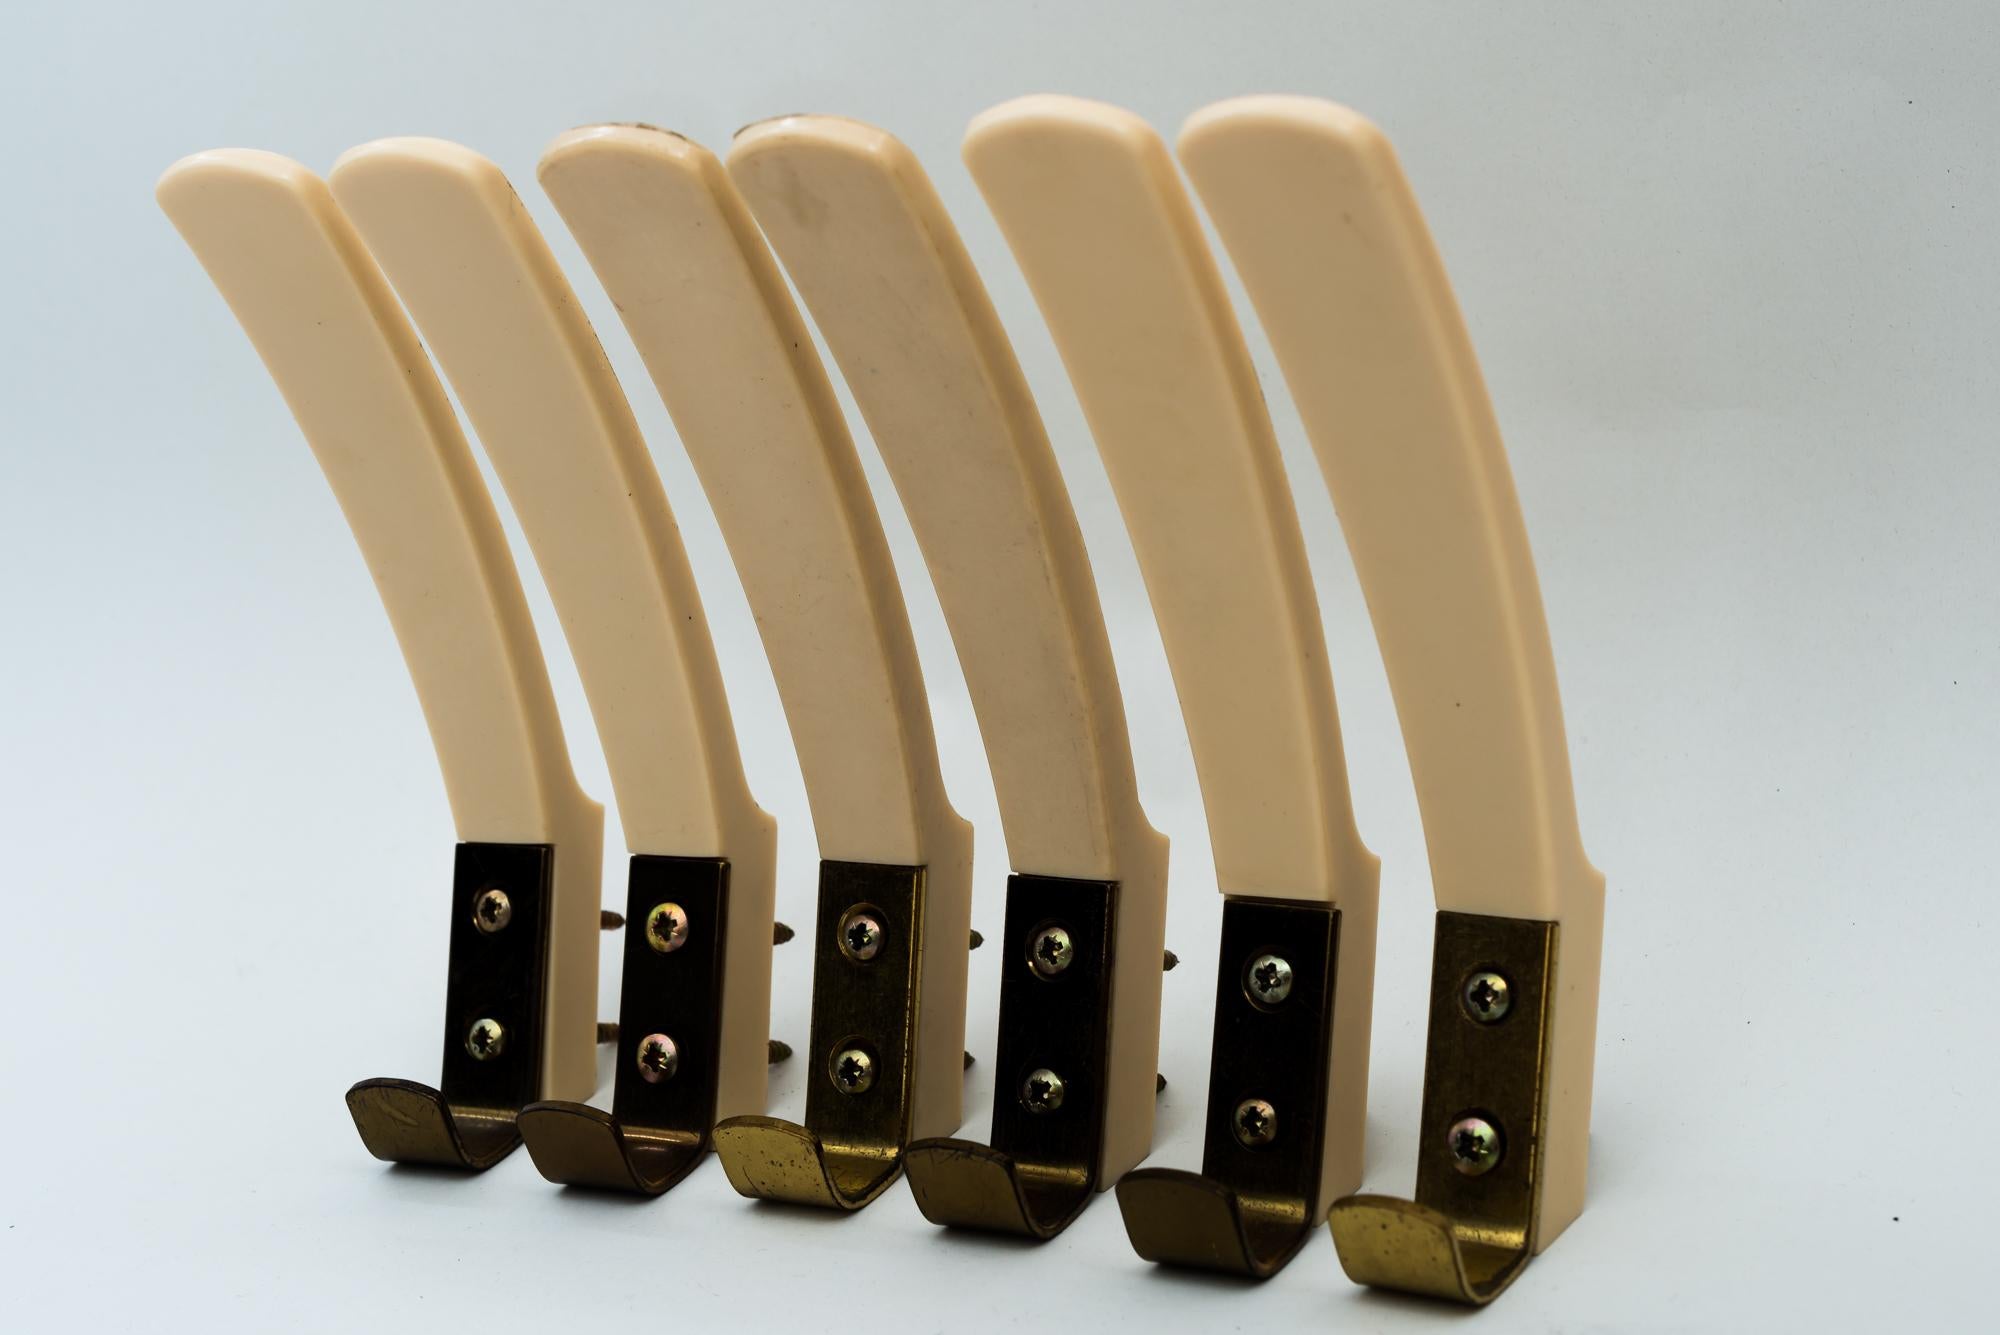 6 wall hooks ( bakelite and brass ), Vienna, circa 1950s
Priced and sell per piece
Original condition.